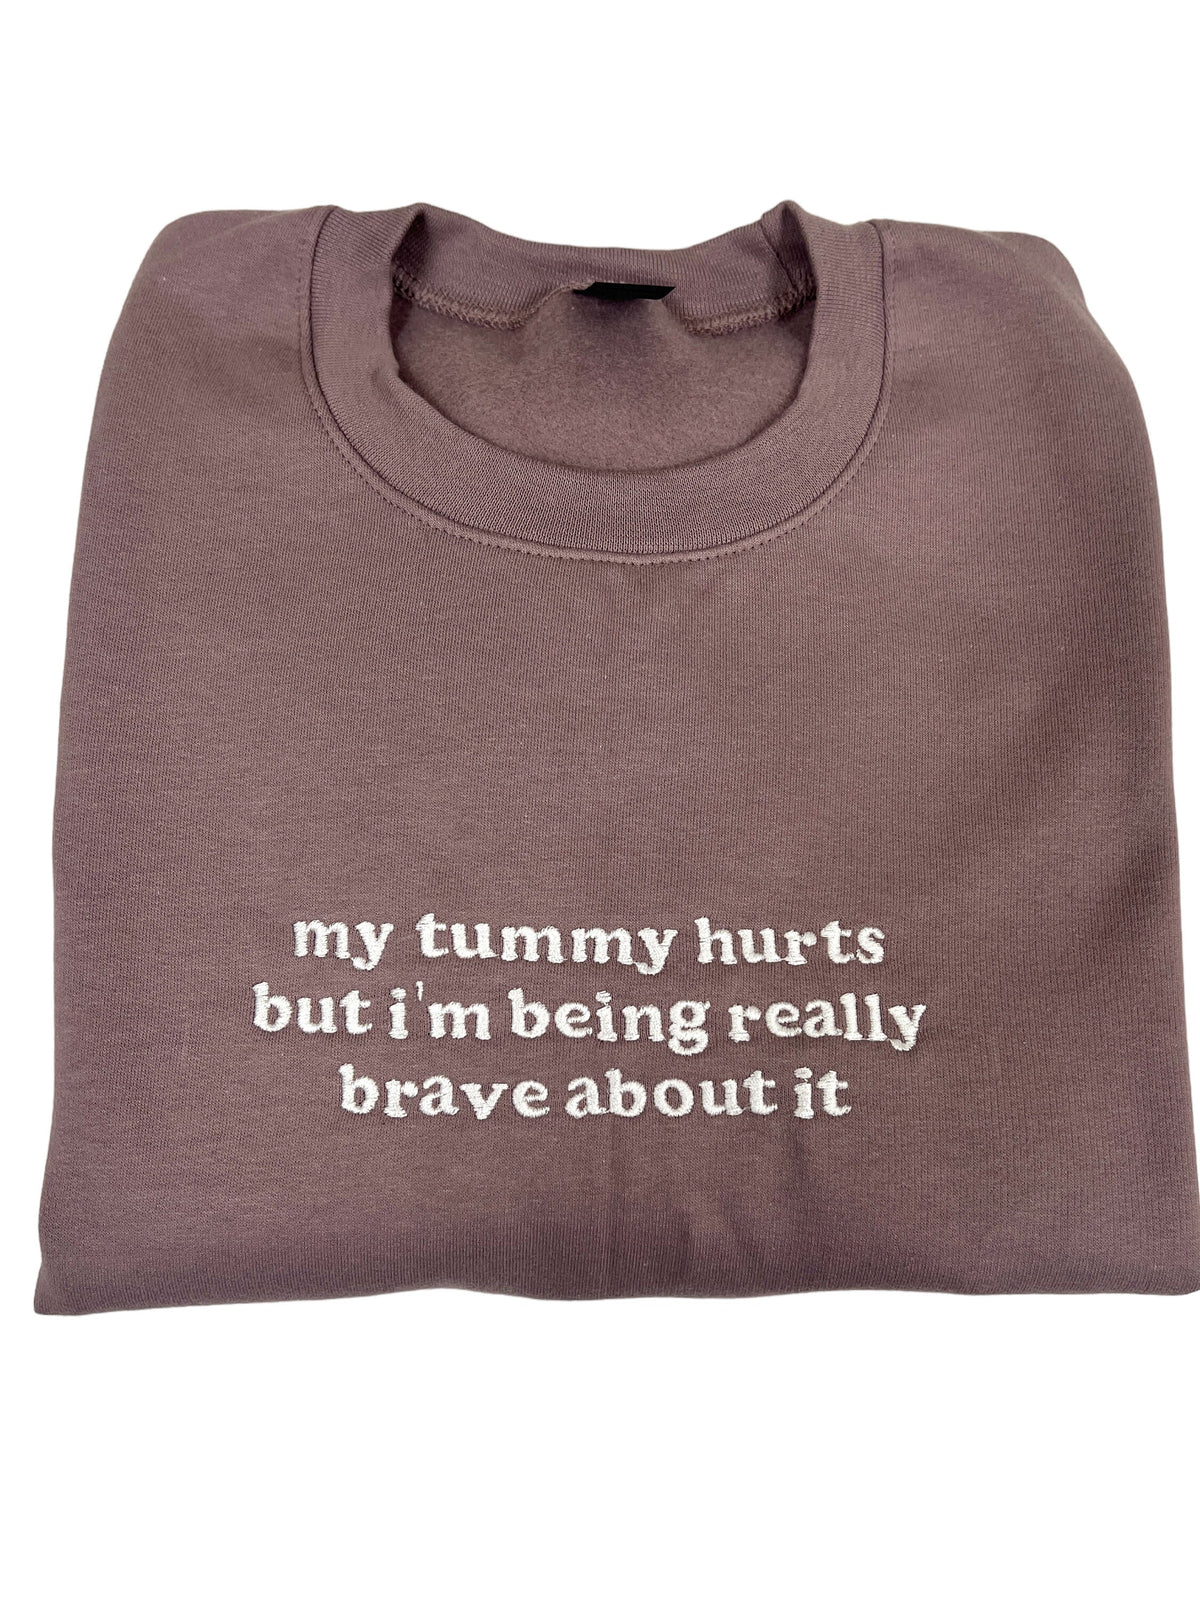 My Tummy Hurts But I'm Being Really Brave About It Embroidered Unisex T-Shirt or Sweatshirt